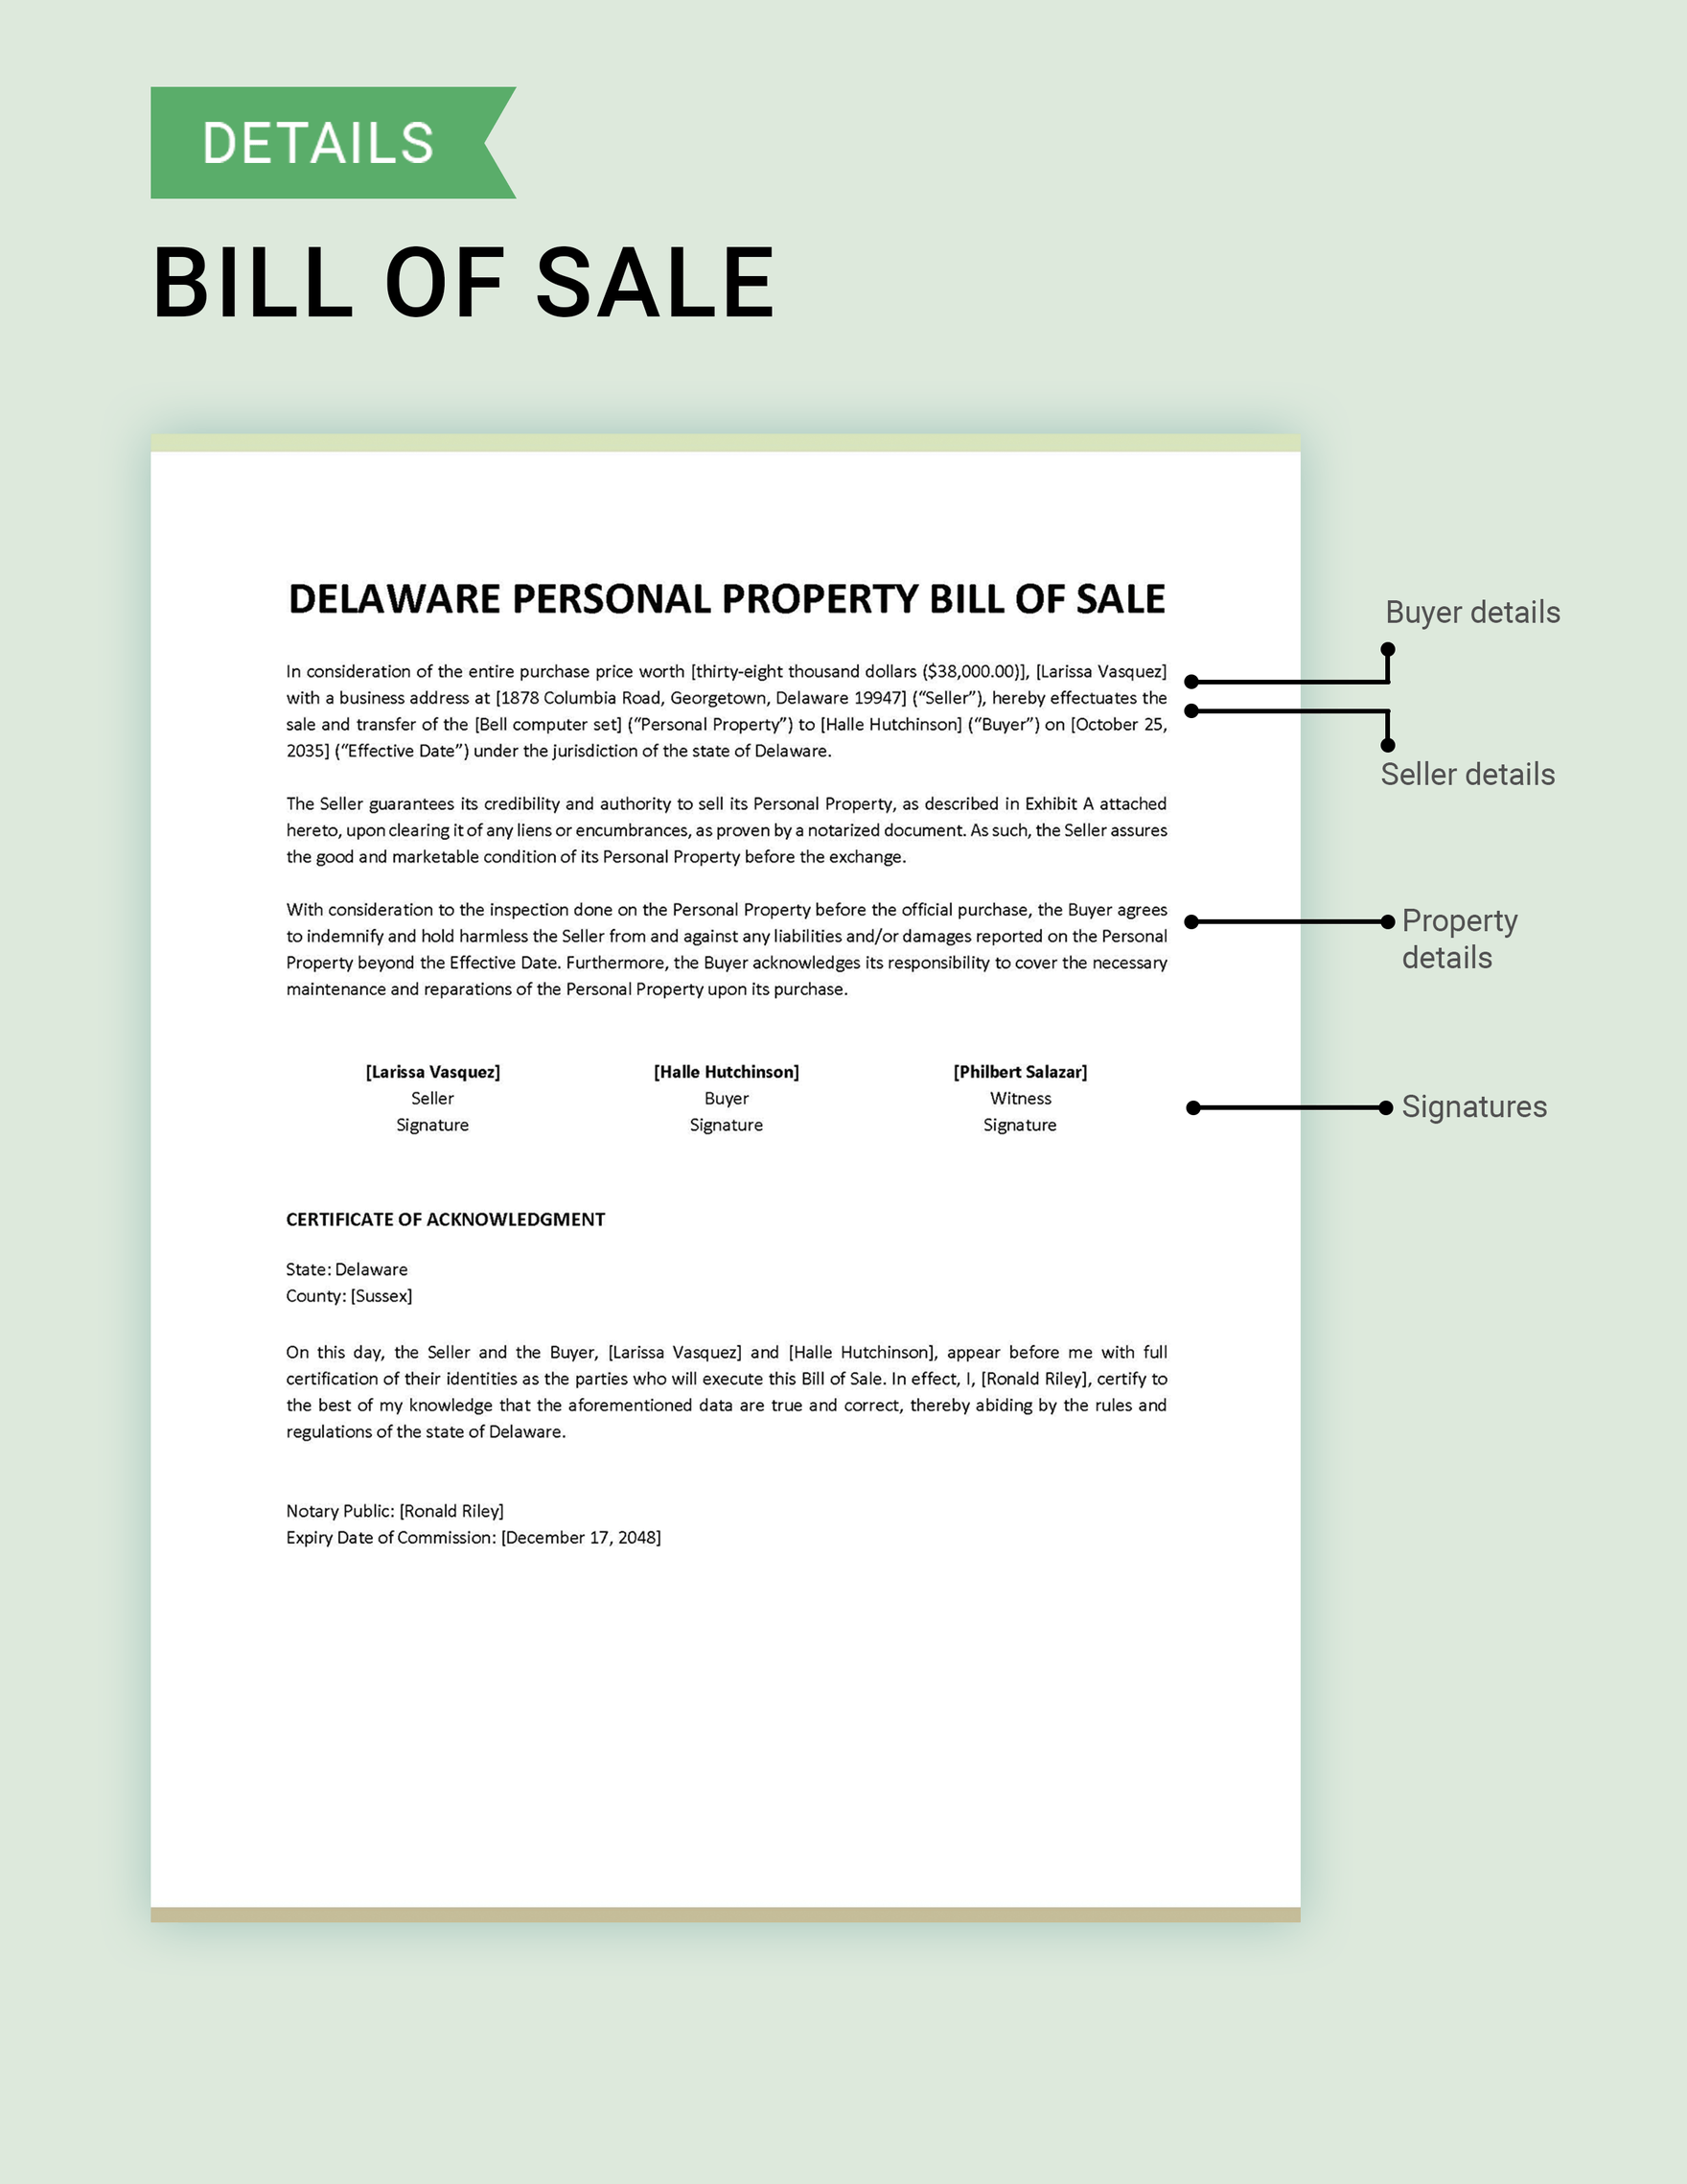 Delaware Personal Property Bill of Sale Template